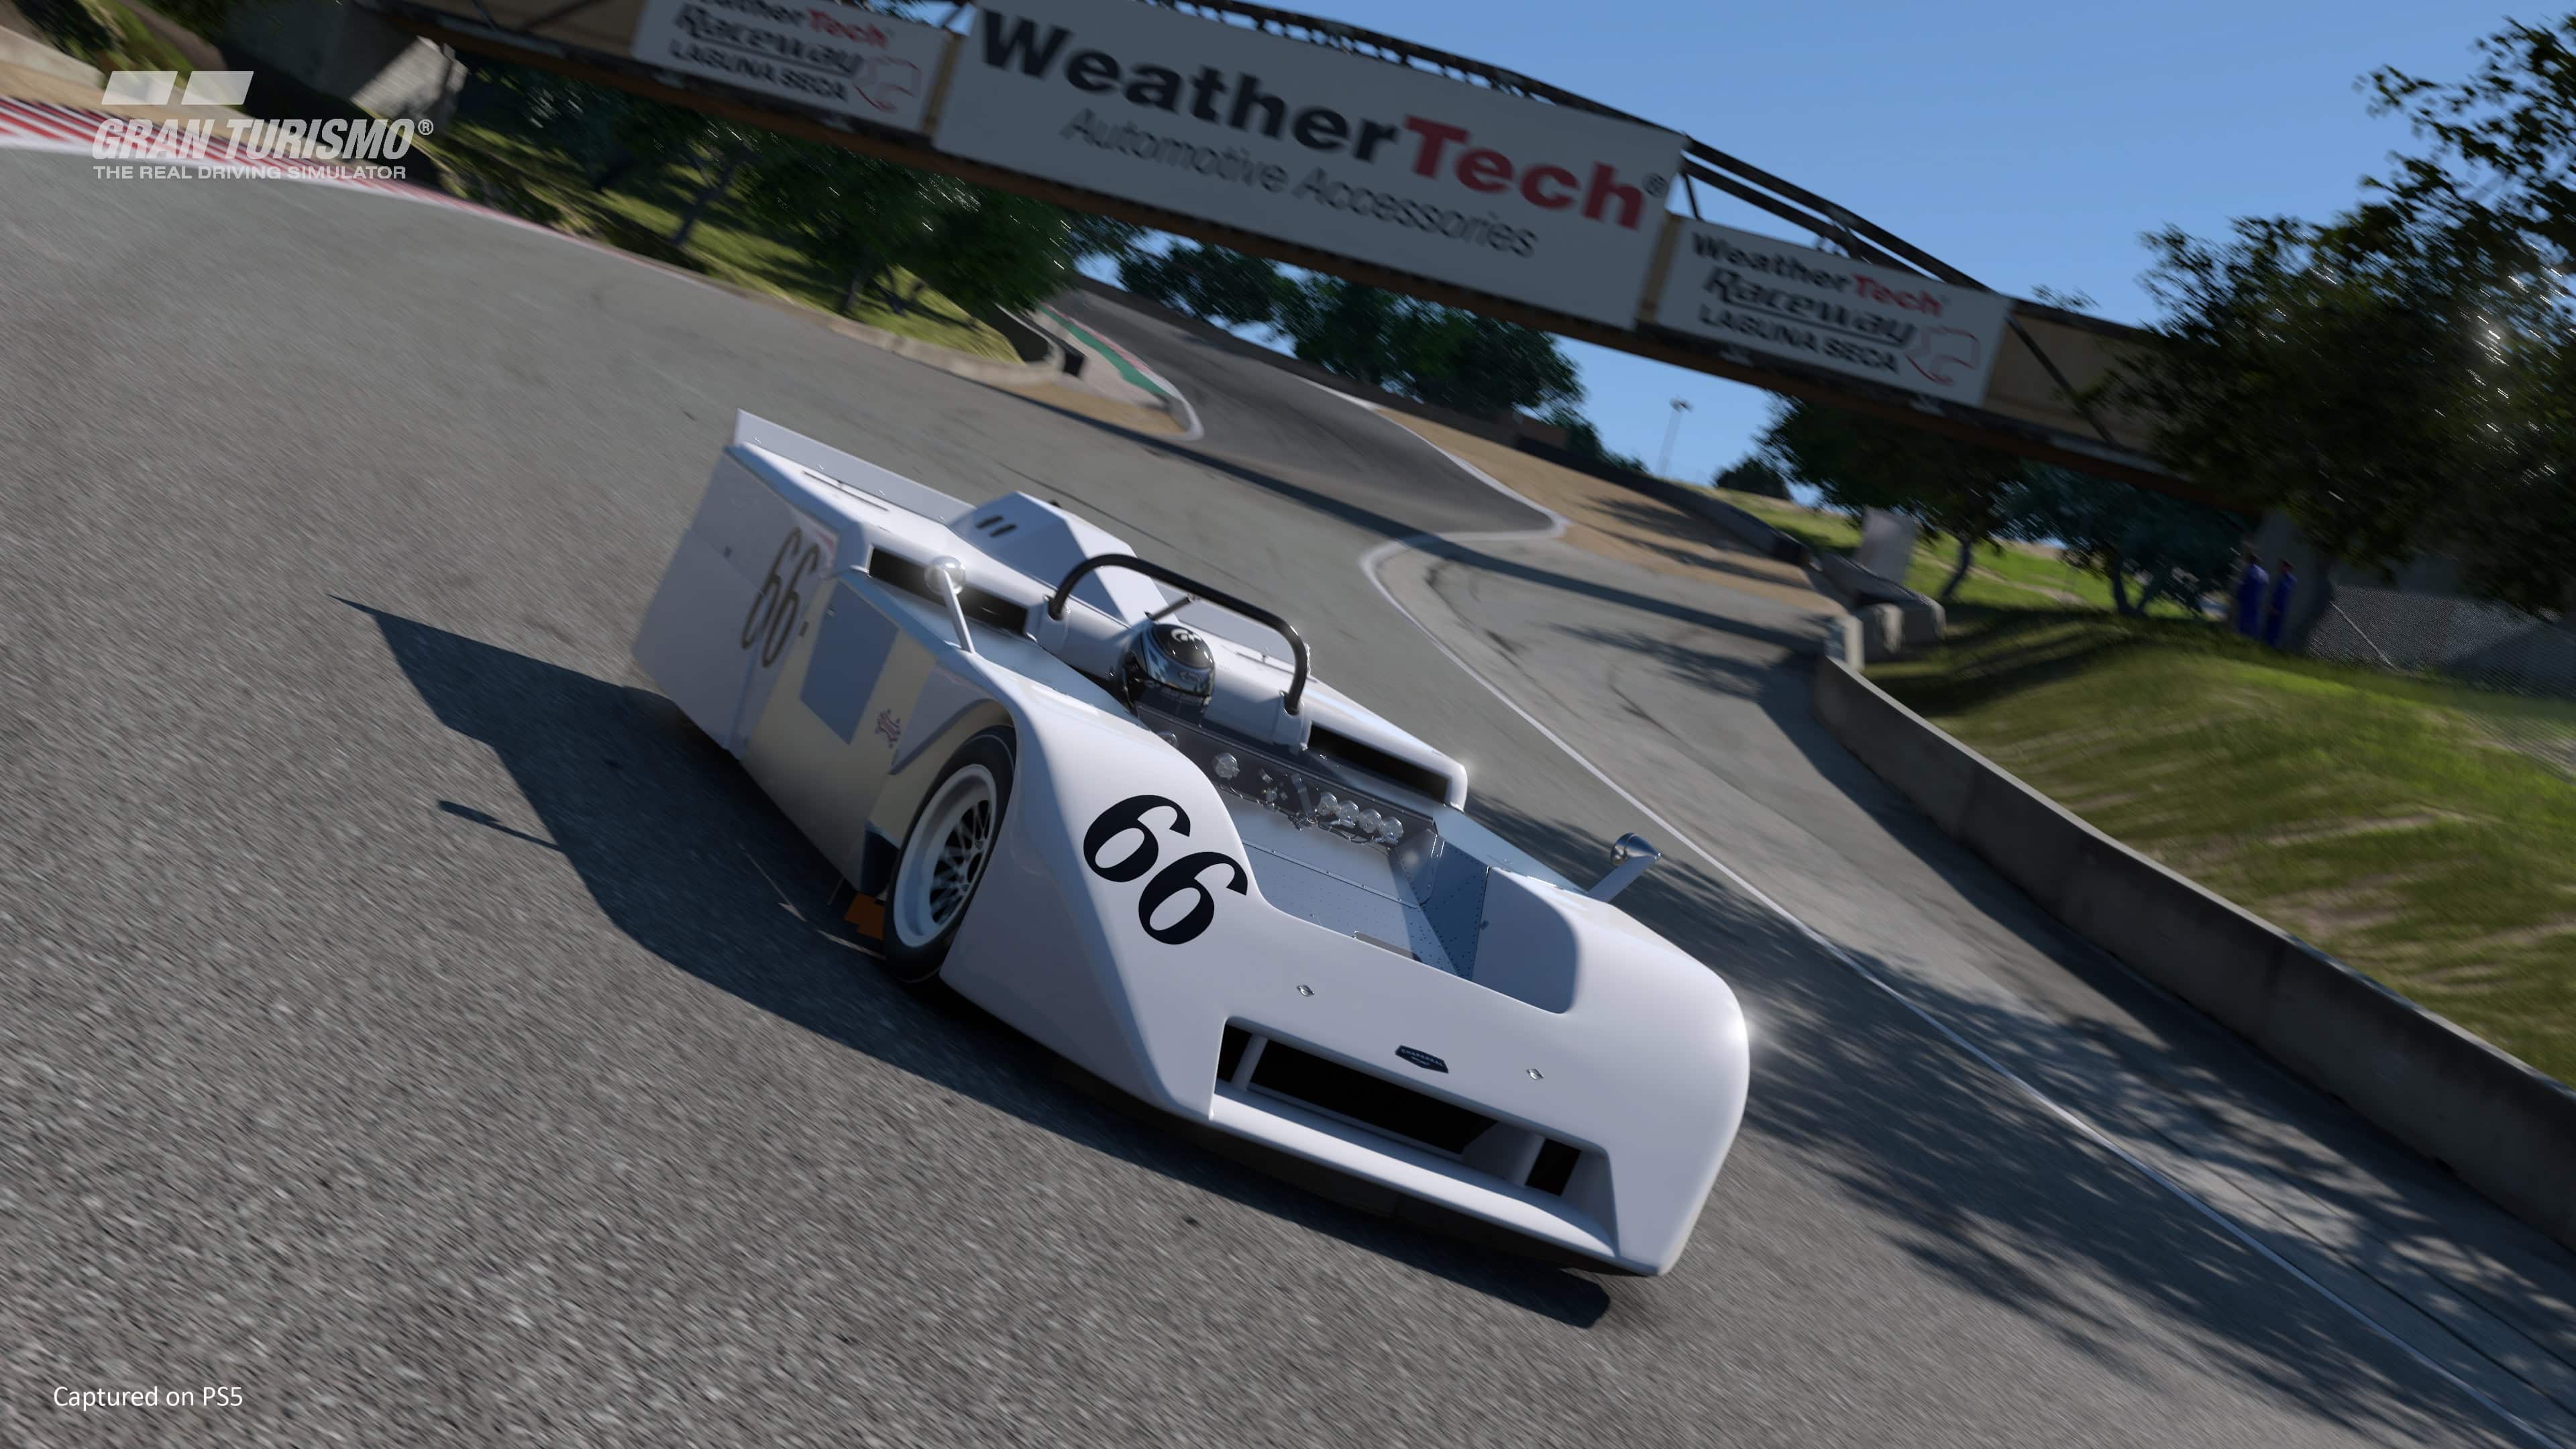 Gran Turismo 7 Update 1.38 Patch Notes and Latest Updates - News